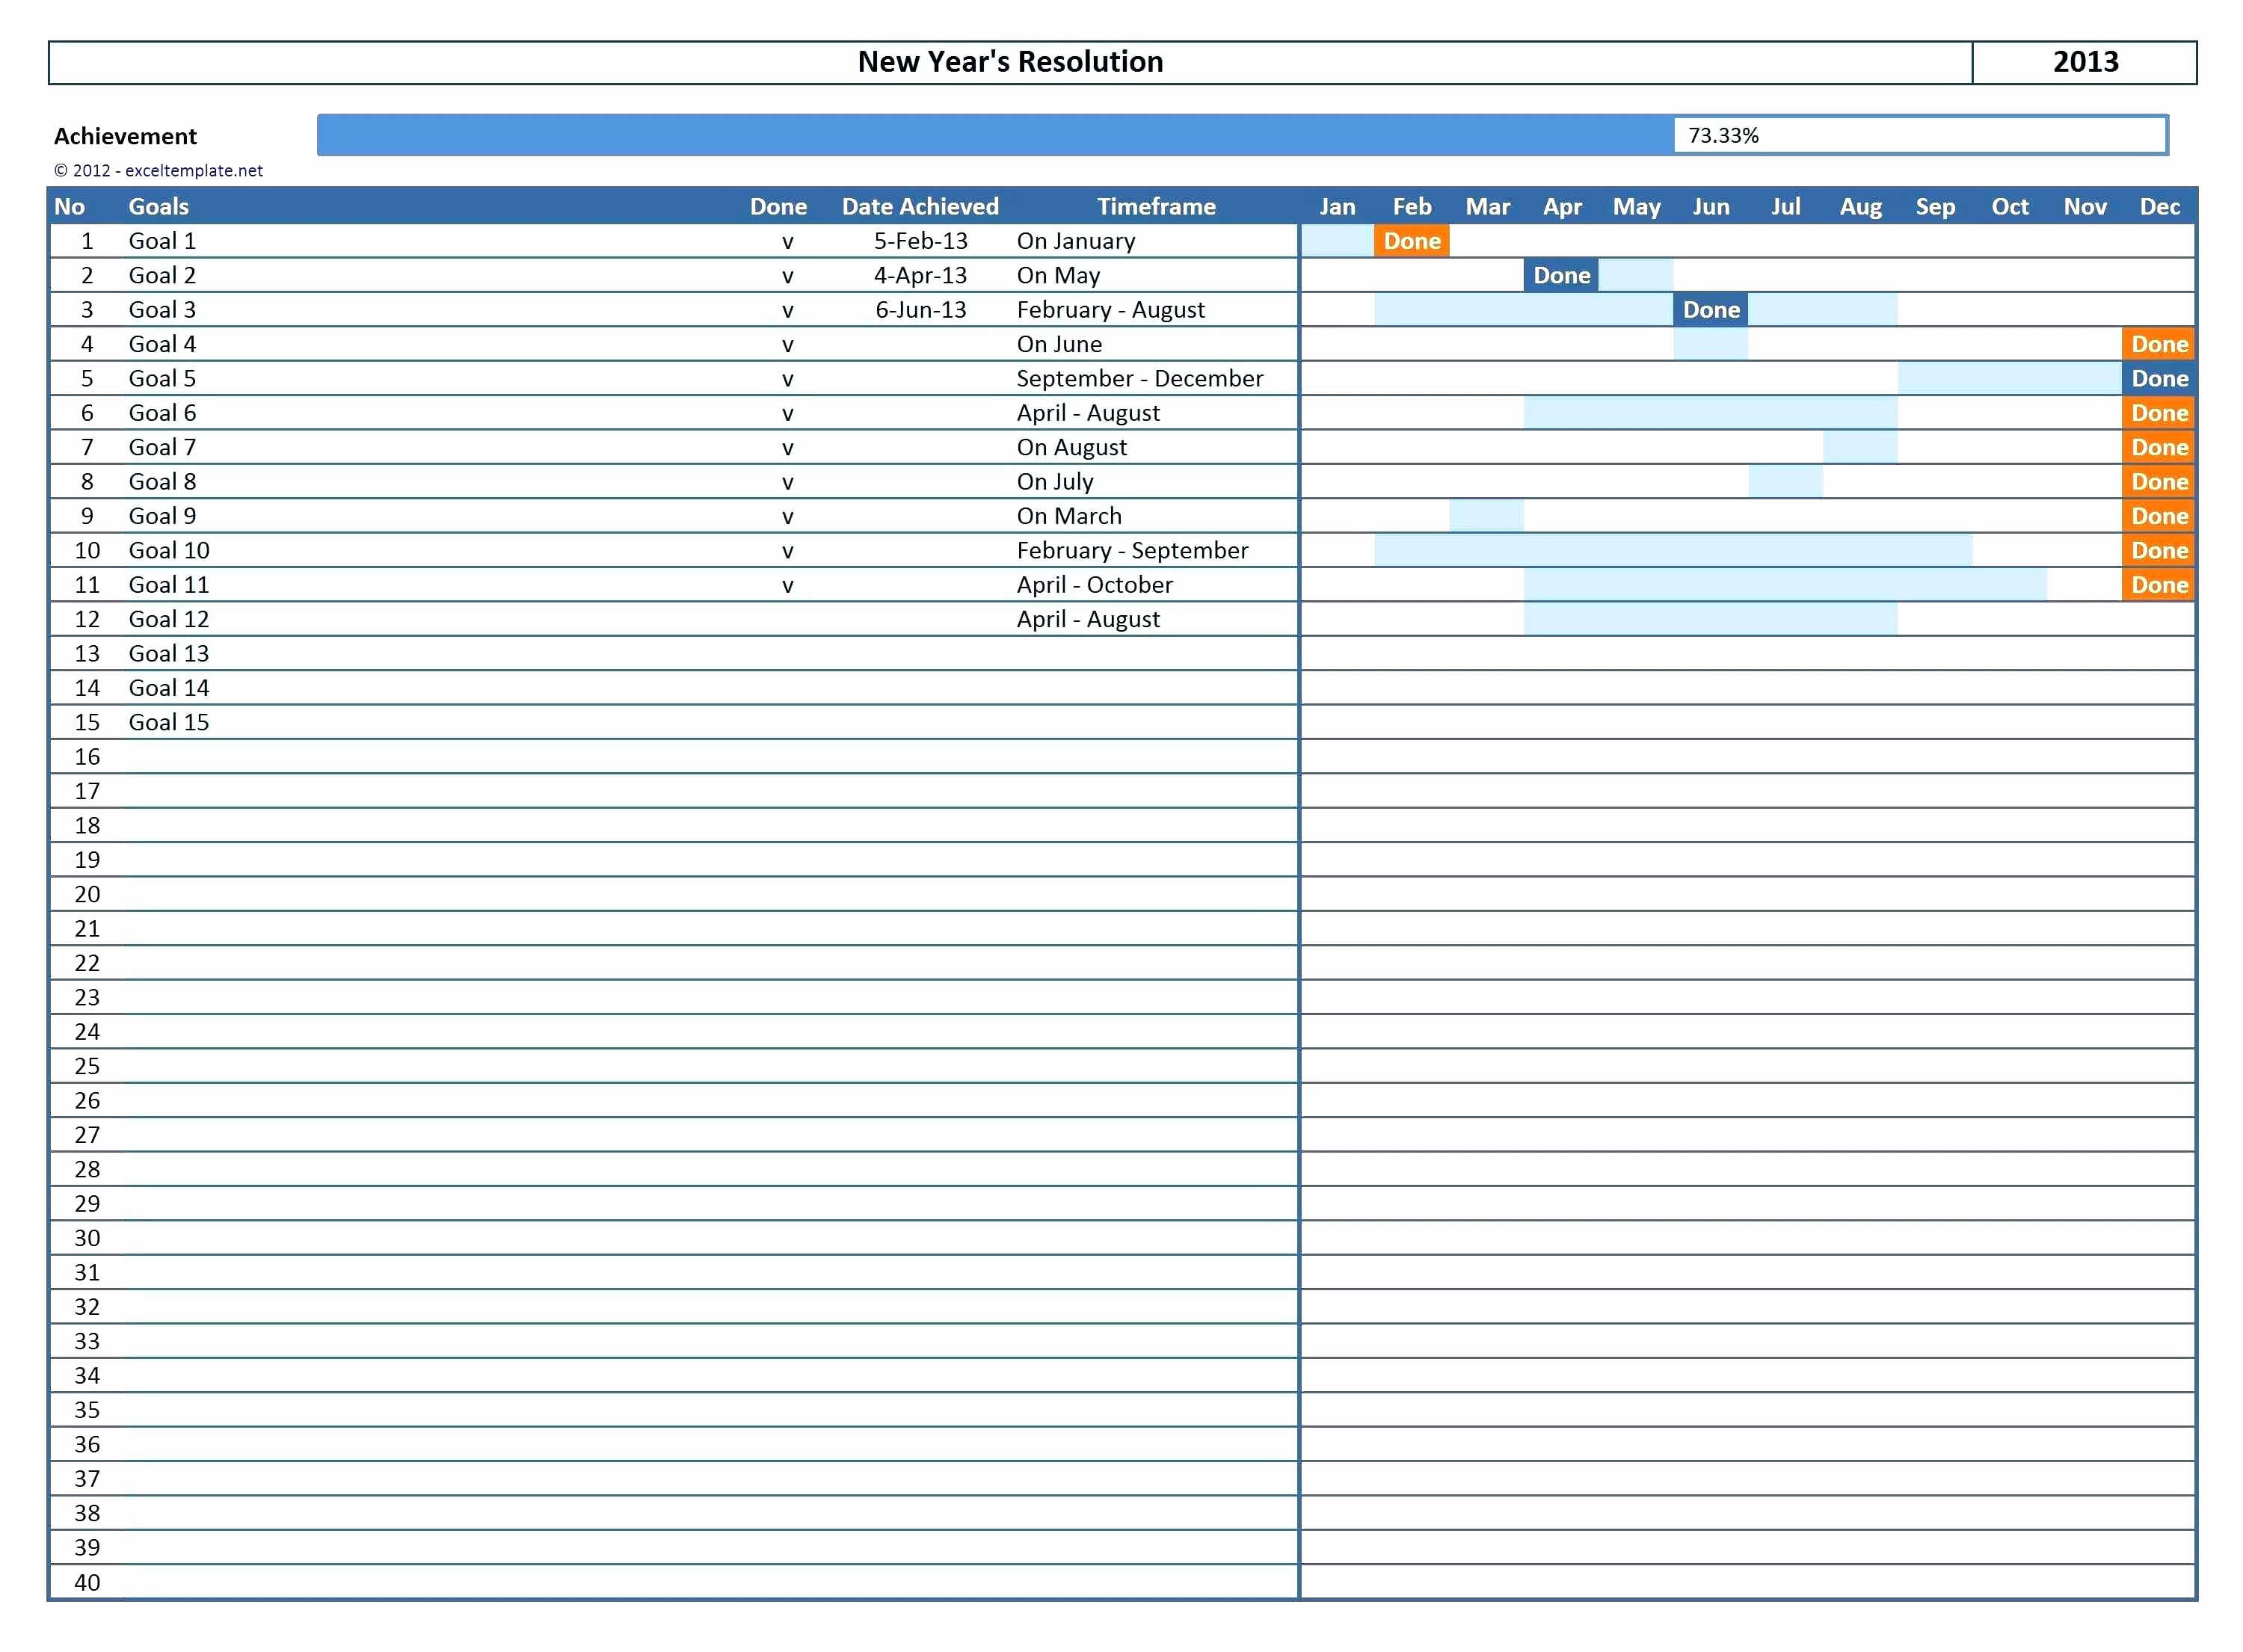 Probate Spreadsheet Best Of Accounts Payable Spreadsheet Template and Accounts Payable Spreadsheet Template